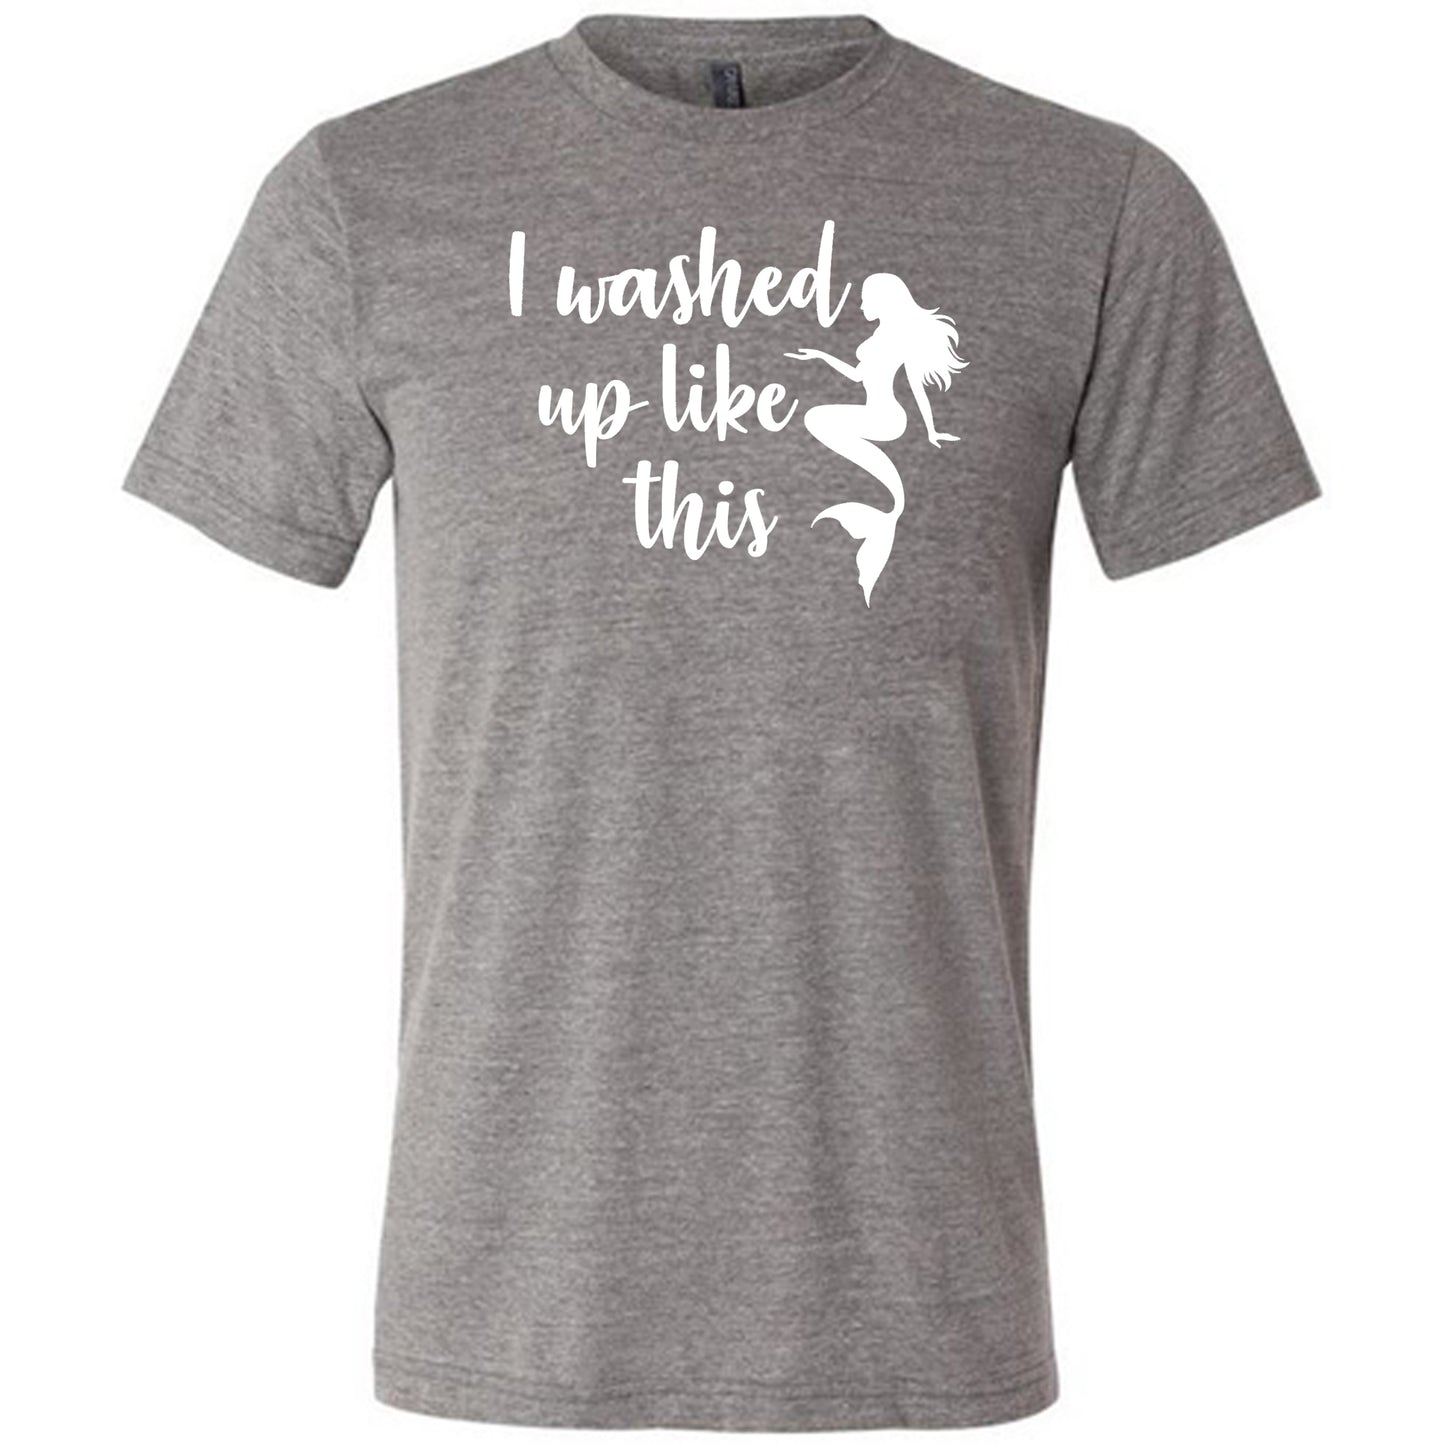 grey unisex tee with the saying "i washed up like this" in white in the center